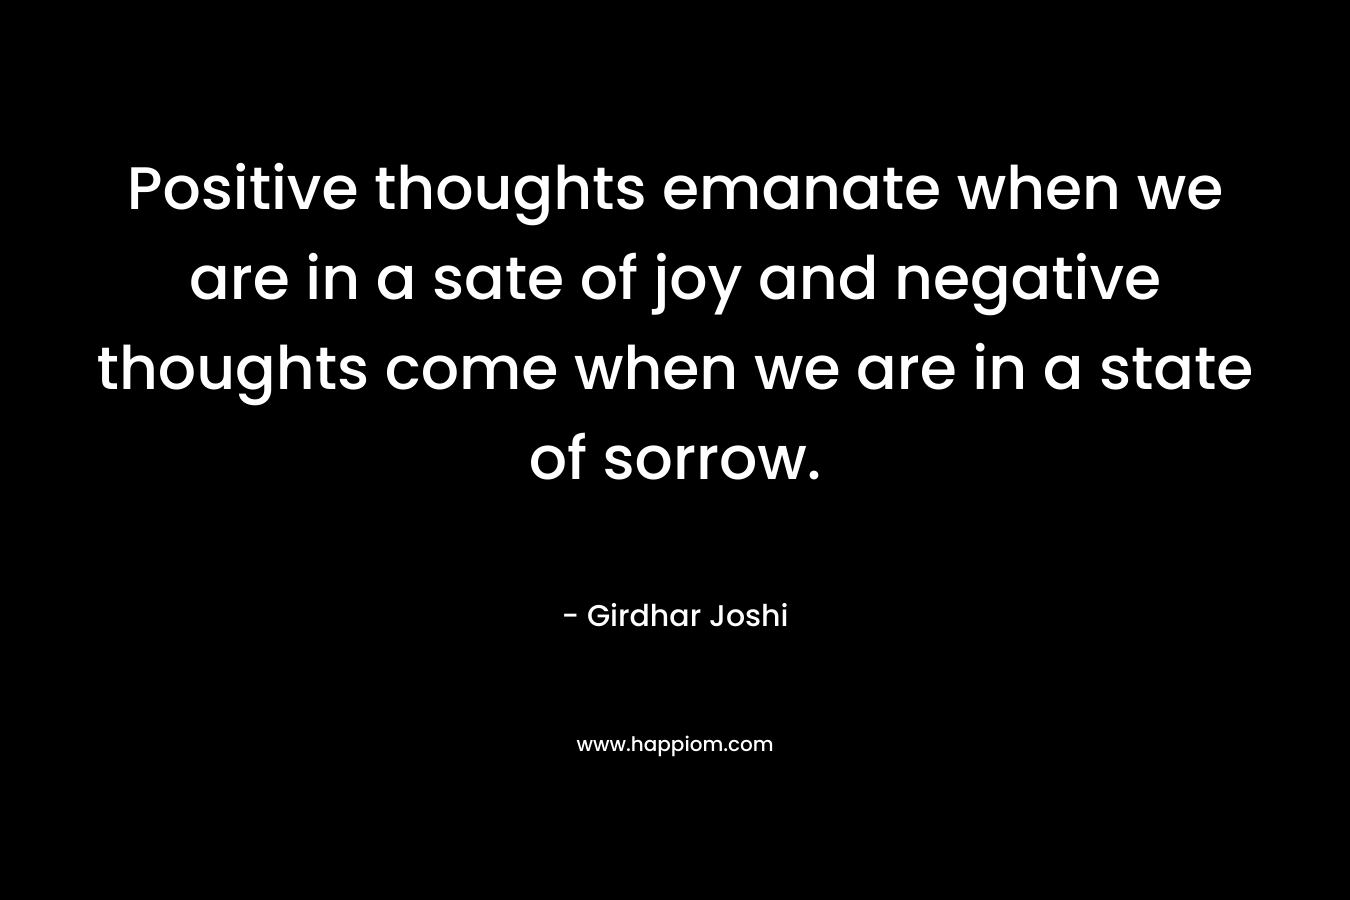 Positive thoughts emanate when we are in a sate of joy and negative thoughts come when we are in a state of sorrow. – Girdhar Joshi